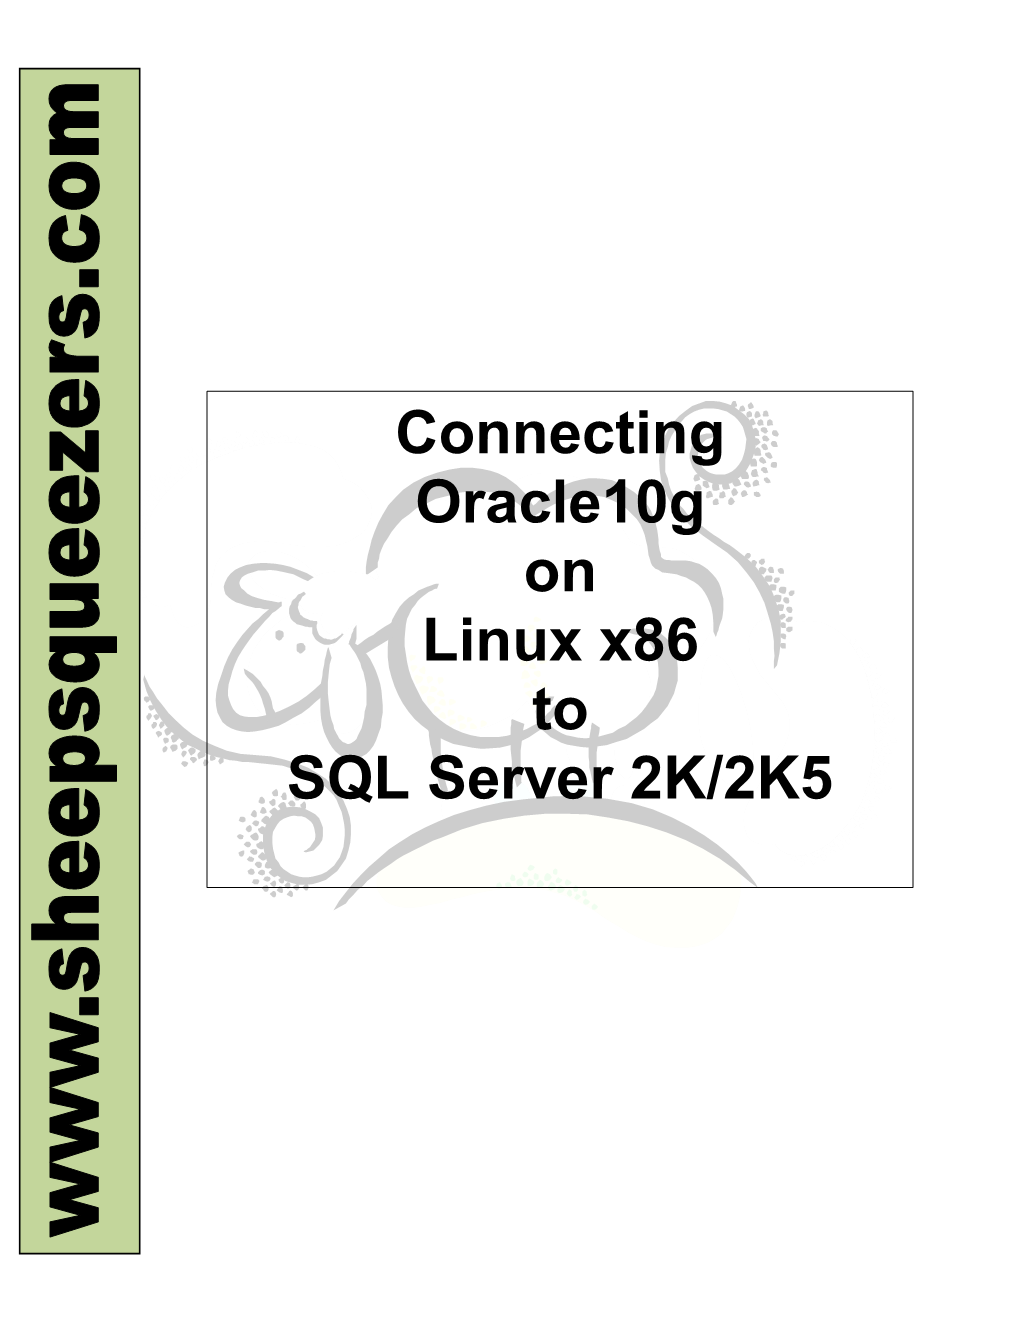 Connecting Oracle10g on Linux X86 to SQL Server 2K/2K5